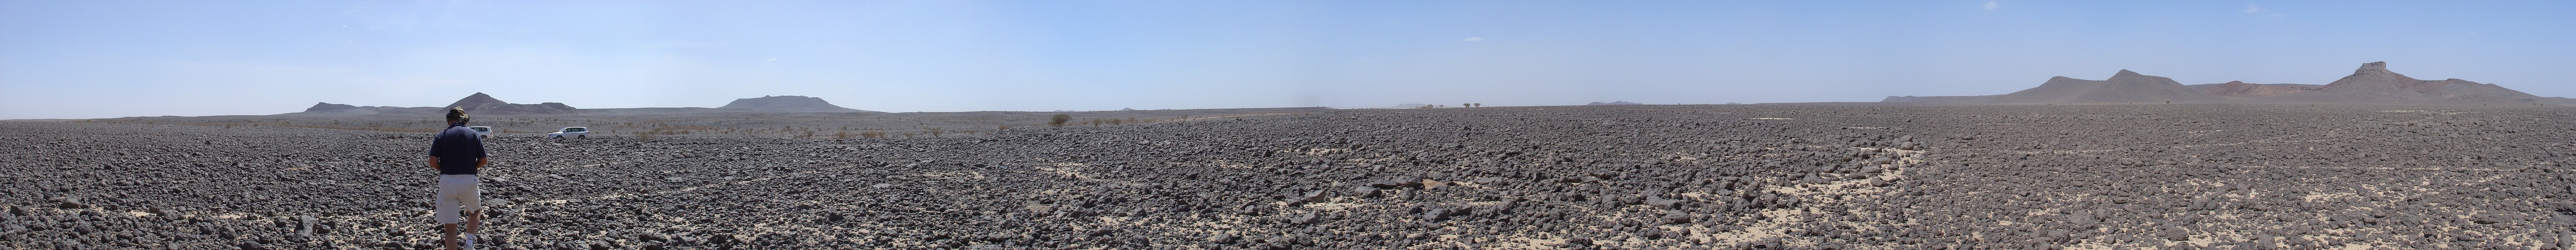 Panorama photo showing 'magnificent desolation'